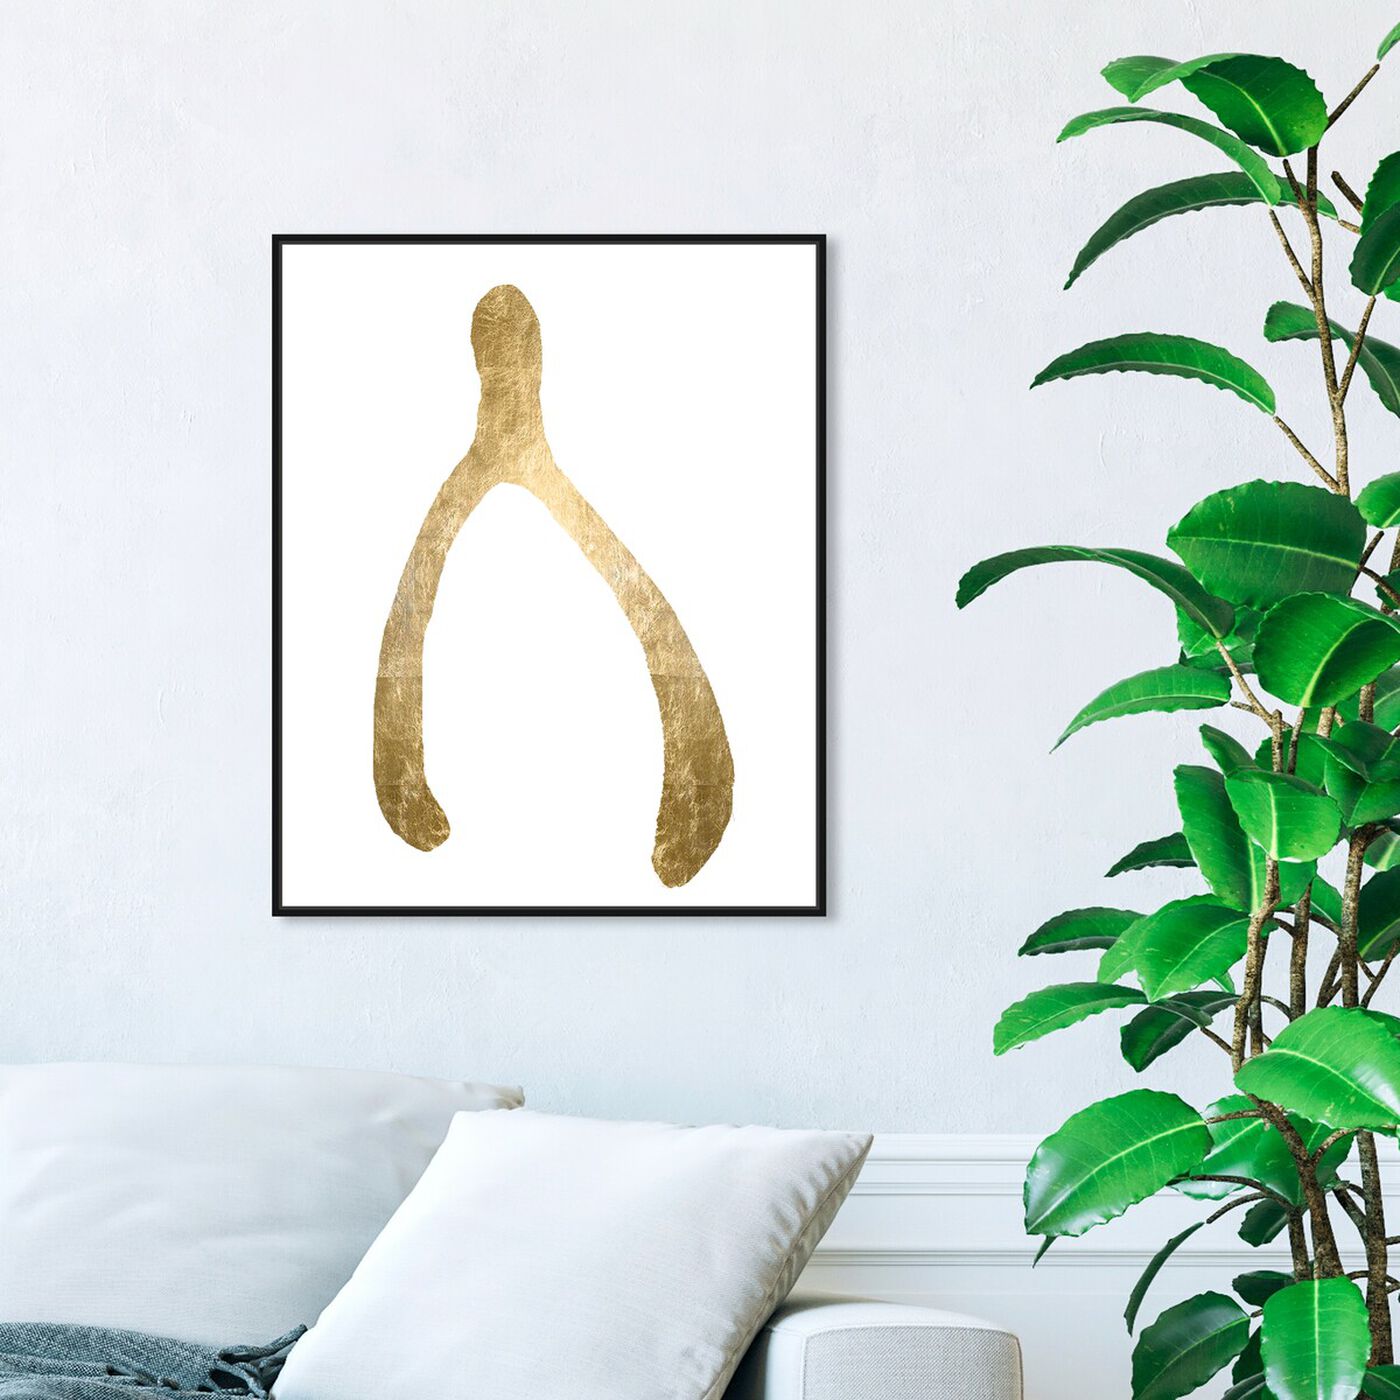 Hanging view of Wishbone Gold Foil featuring symbols and objects and symbols art.